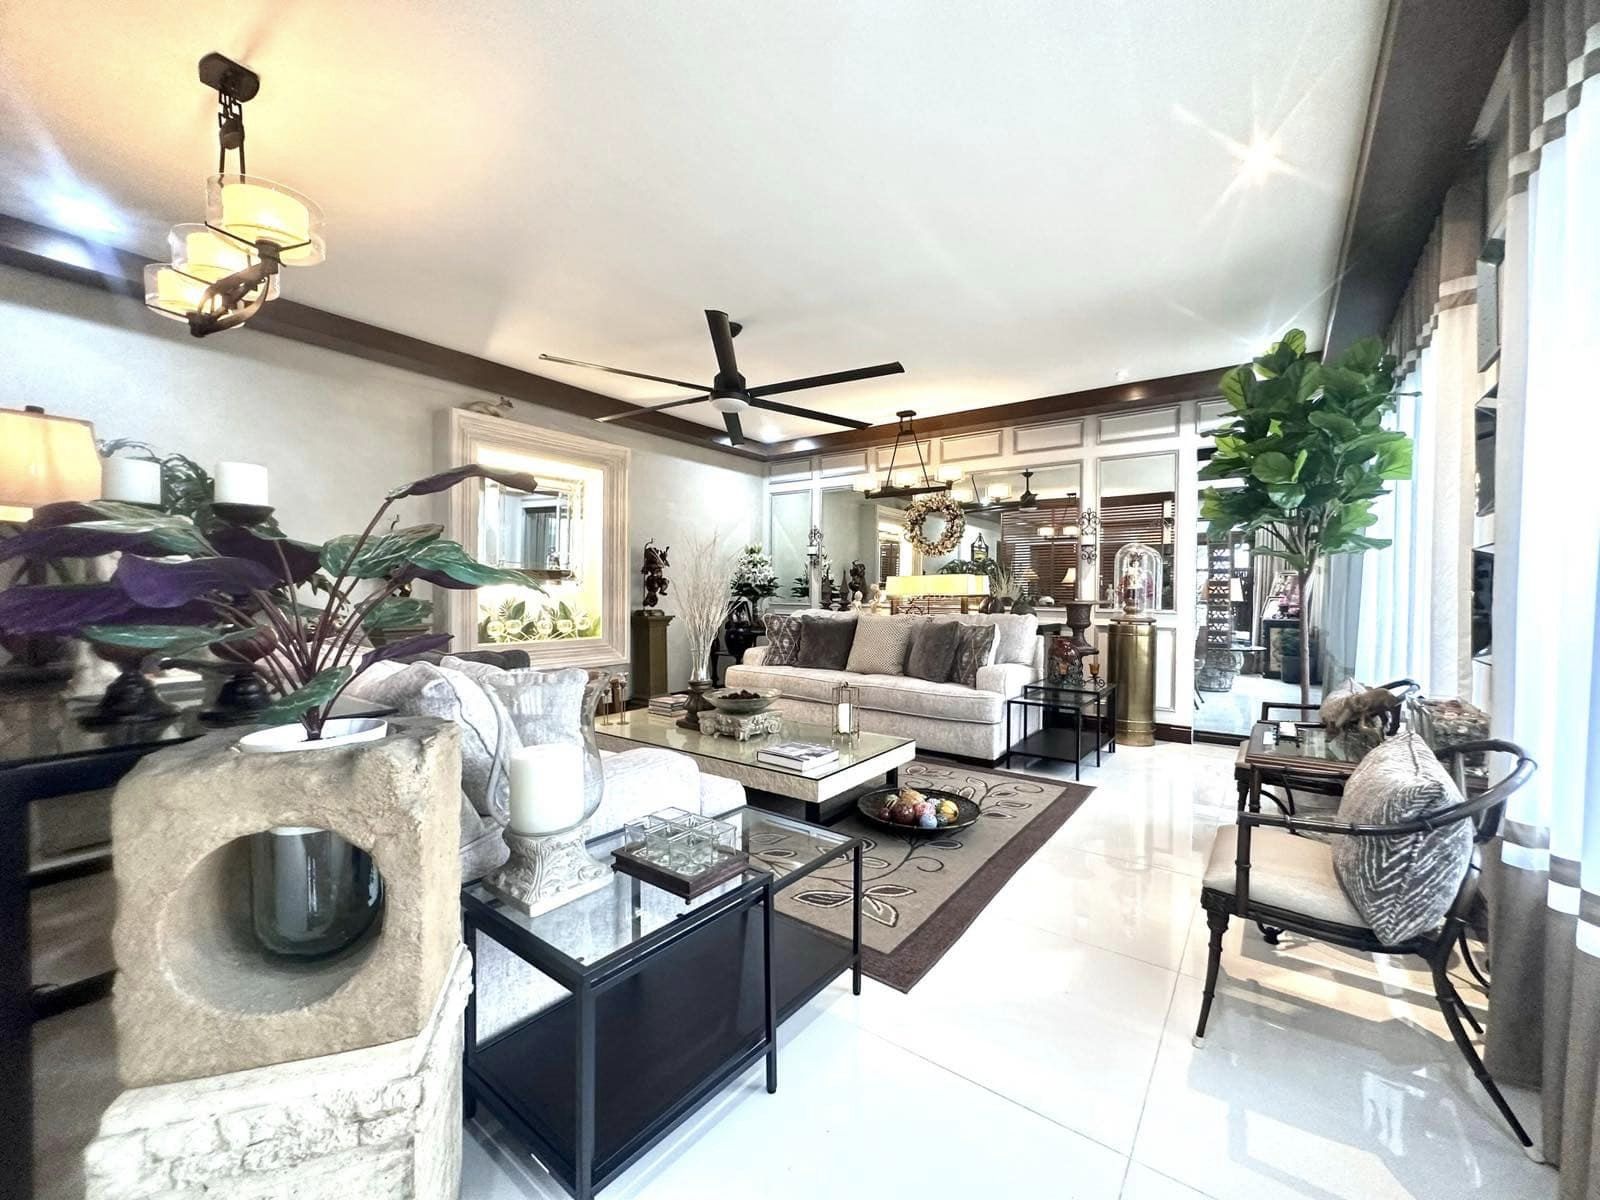 Picturesque5-BedroomBungalowHouseforSaleinBFHomes,Paranaque-12.jpg